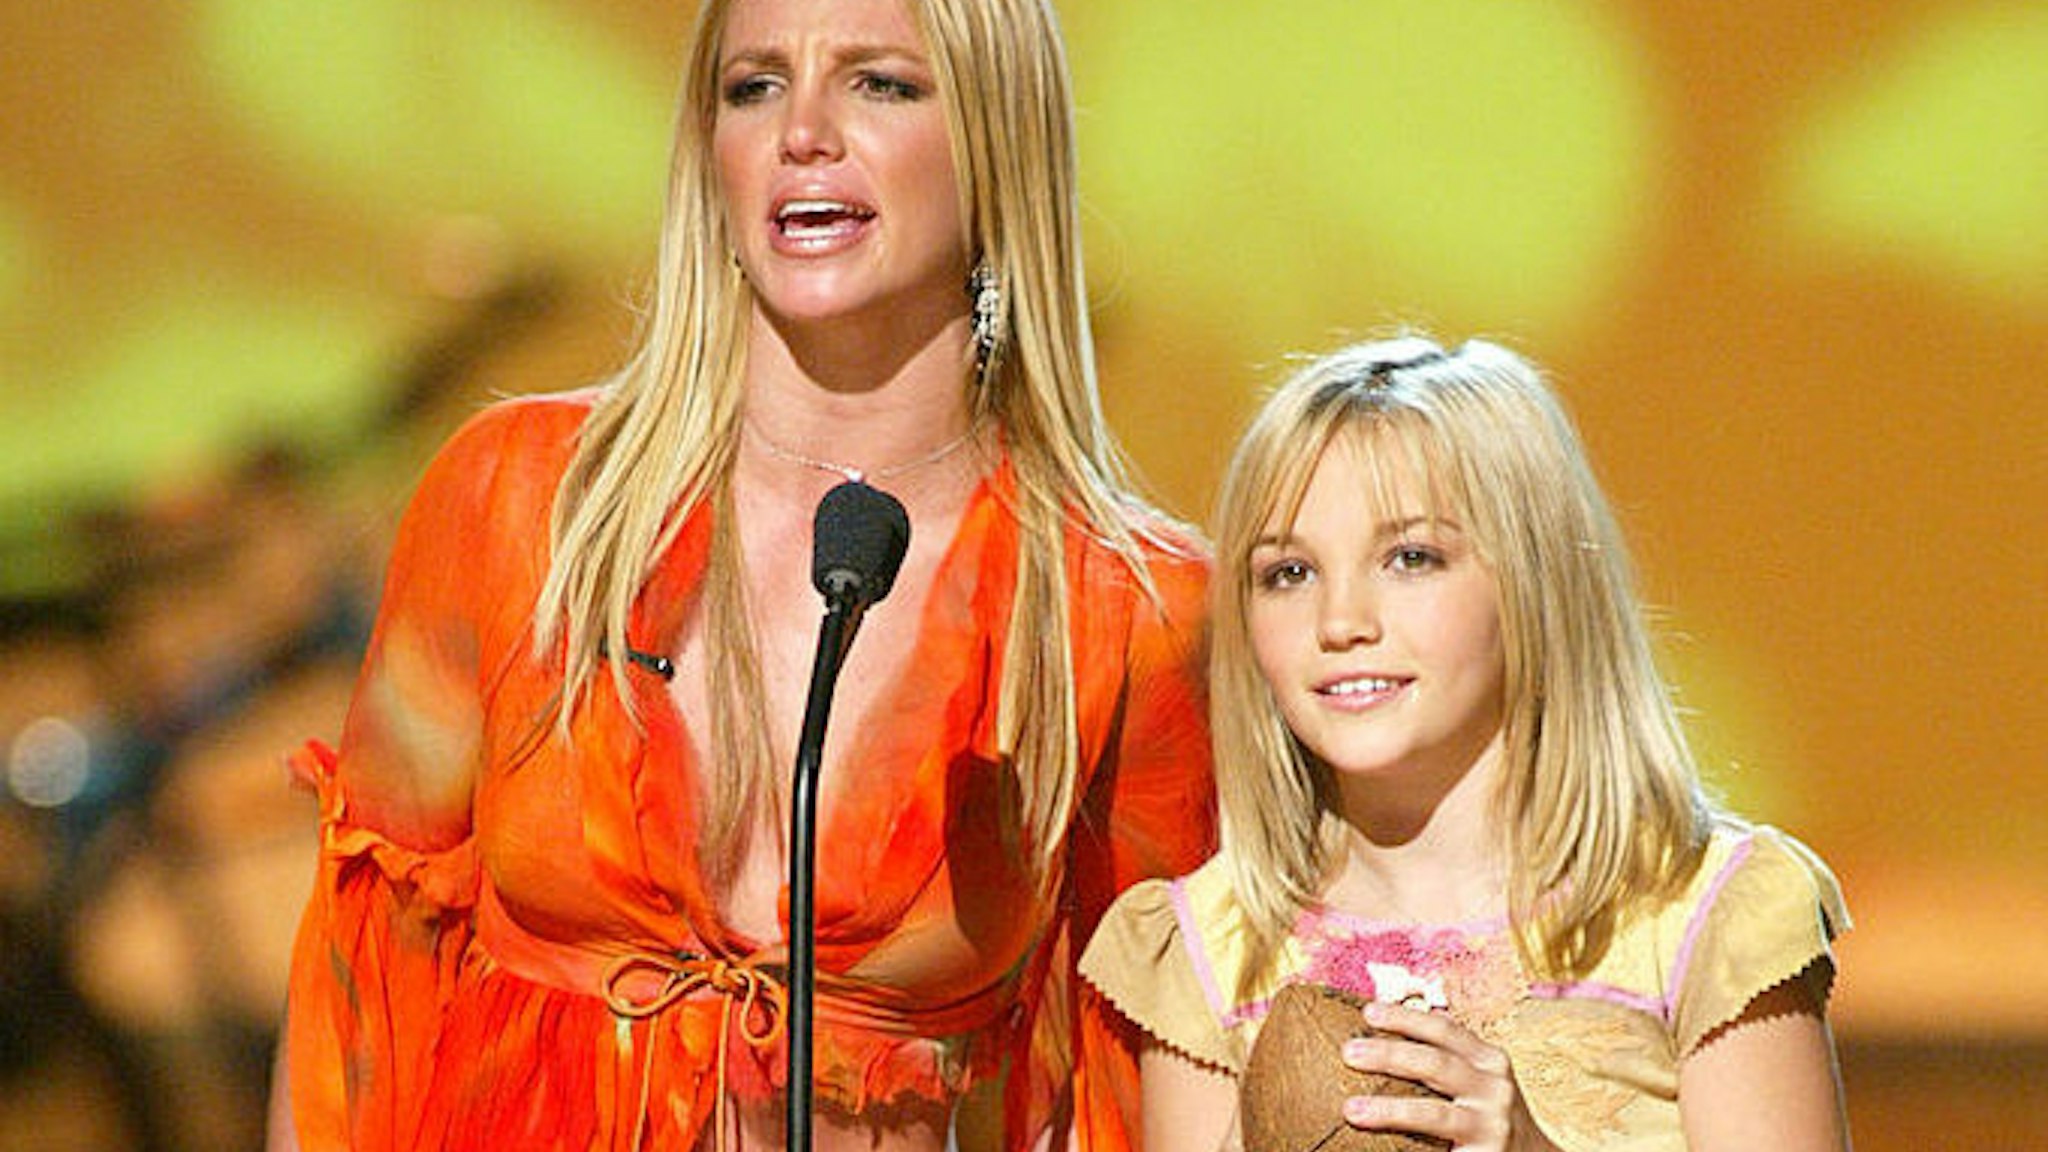 Britney Spears and her sister Jamie Lynn Spears at "The Teen Choice Awards 2002" at the Universal Amphitheatre in Los Angeles, Ca. Sunday, August 4, 2002.